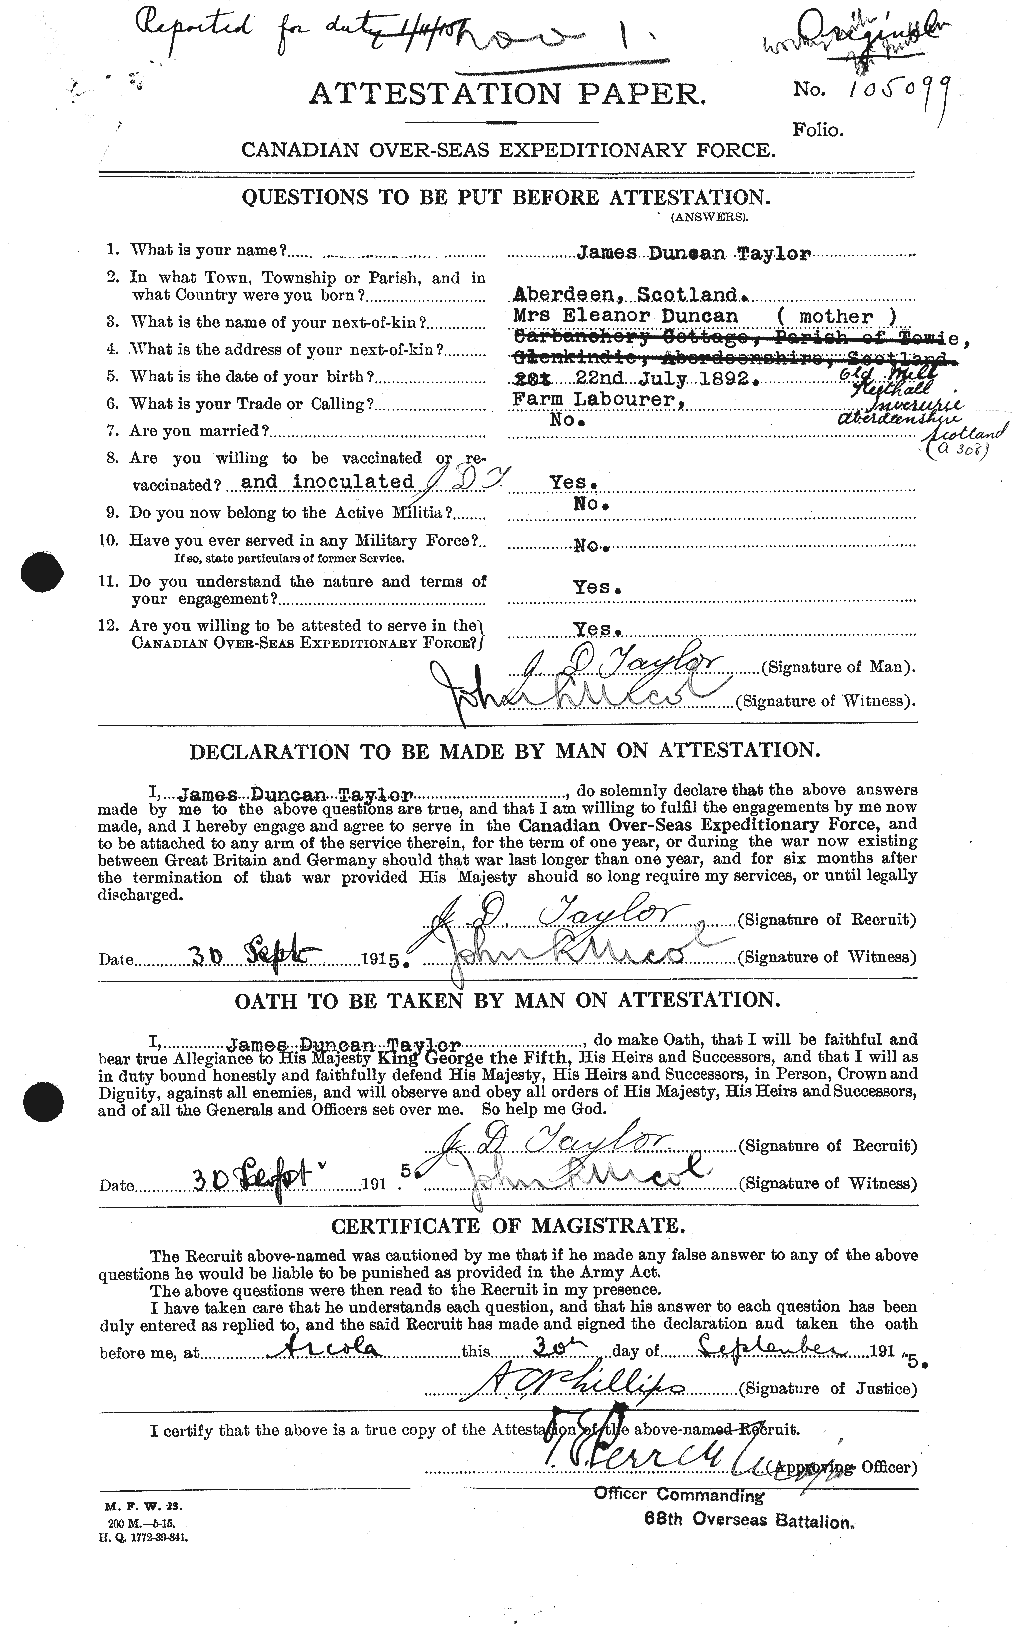 Personnel Records of the First World War - CEF 626913a